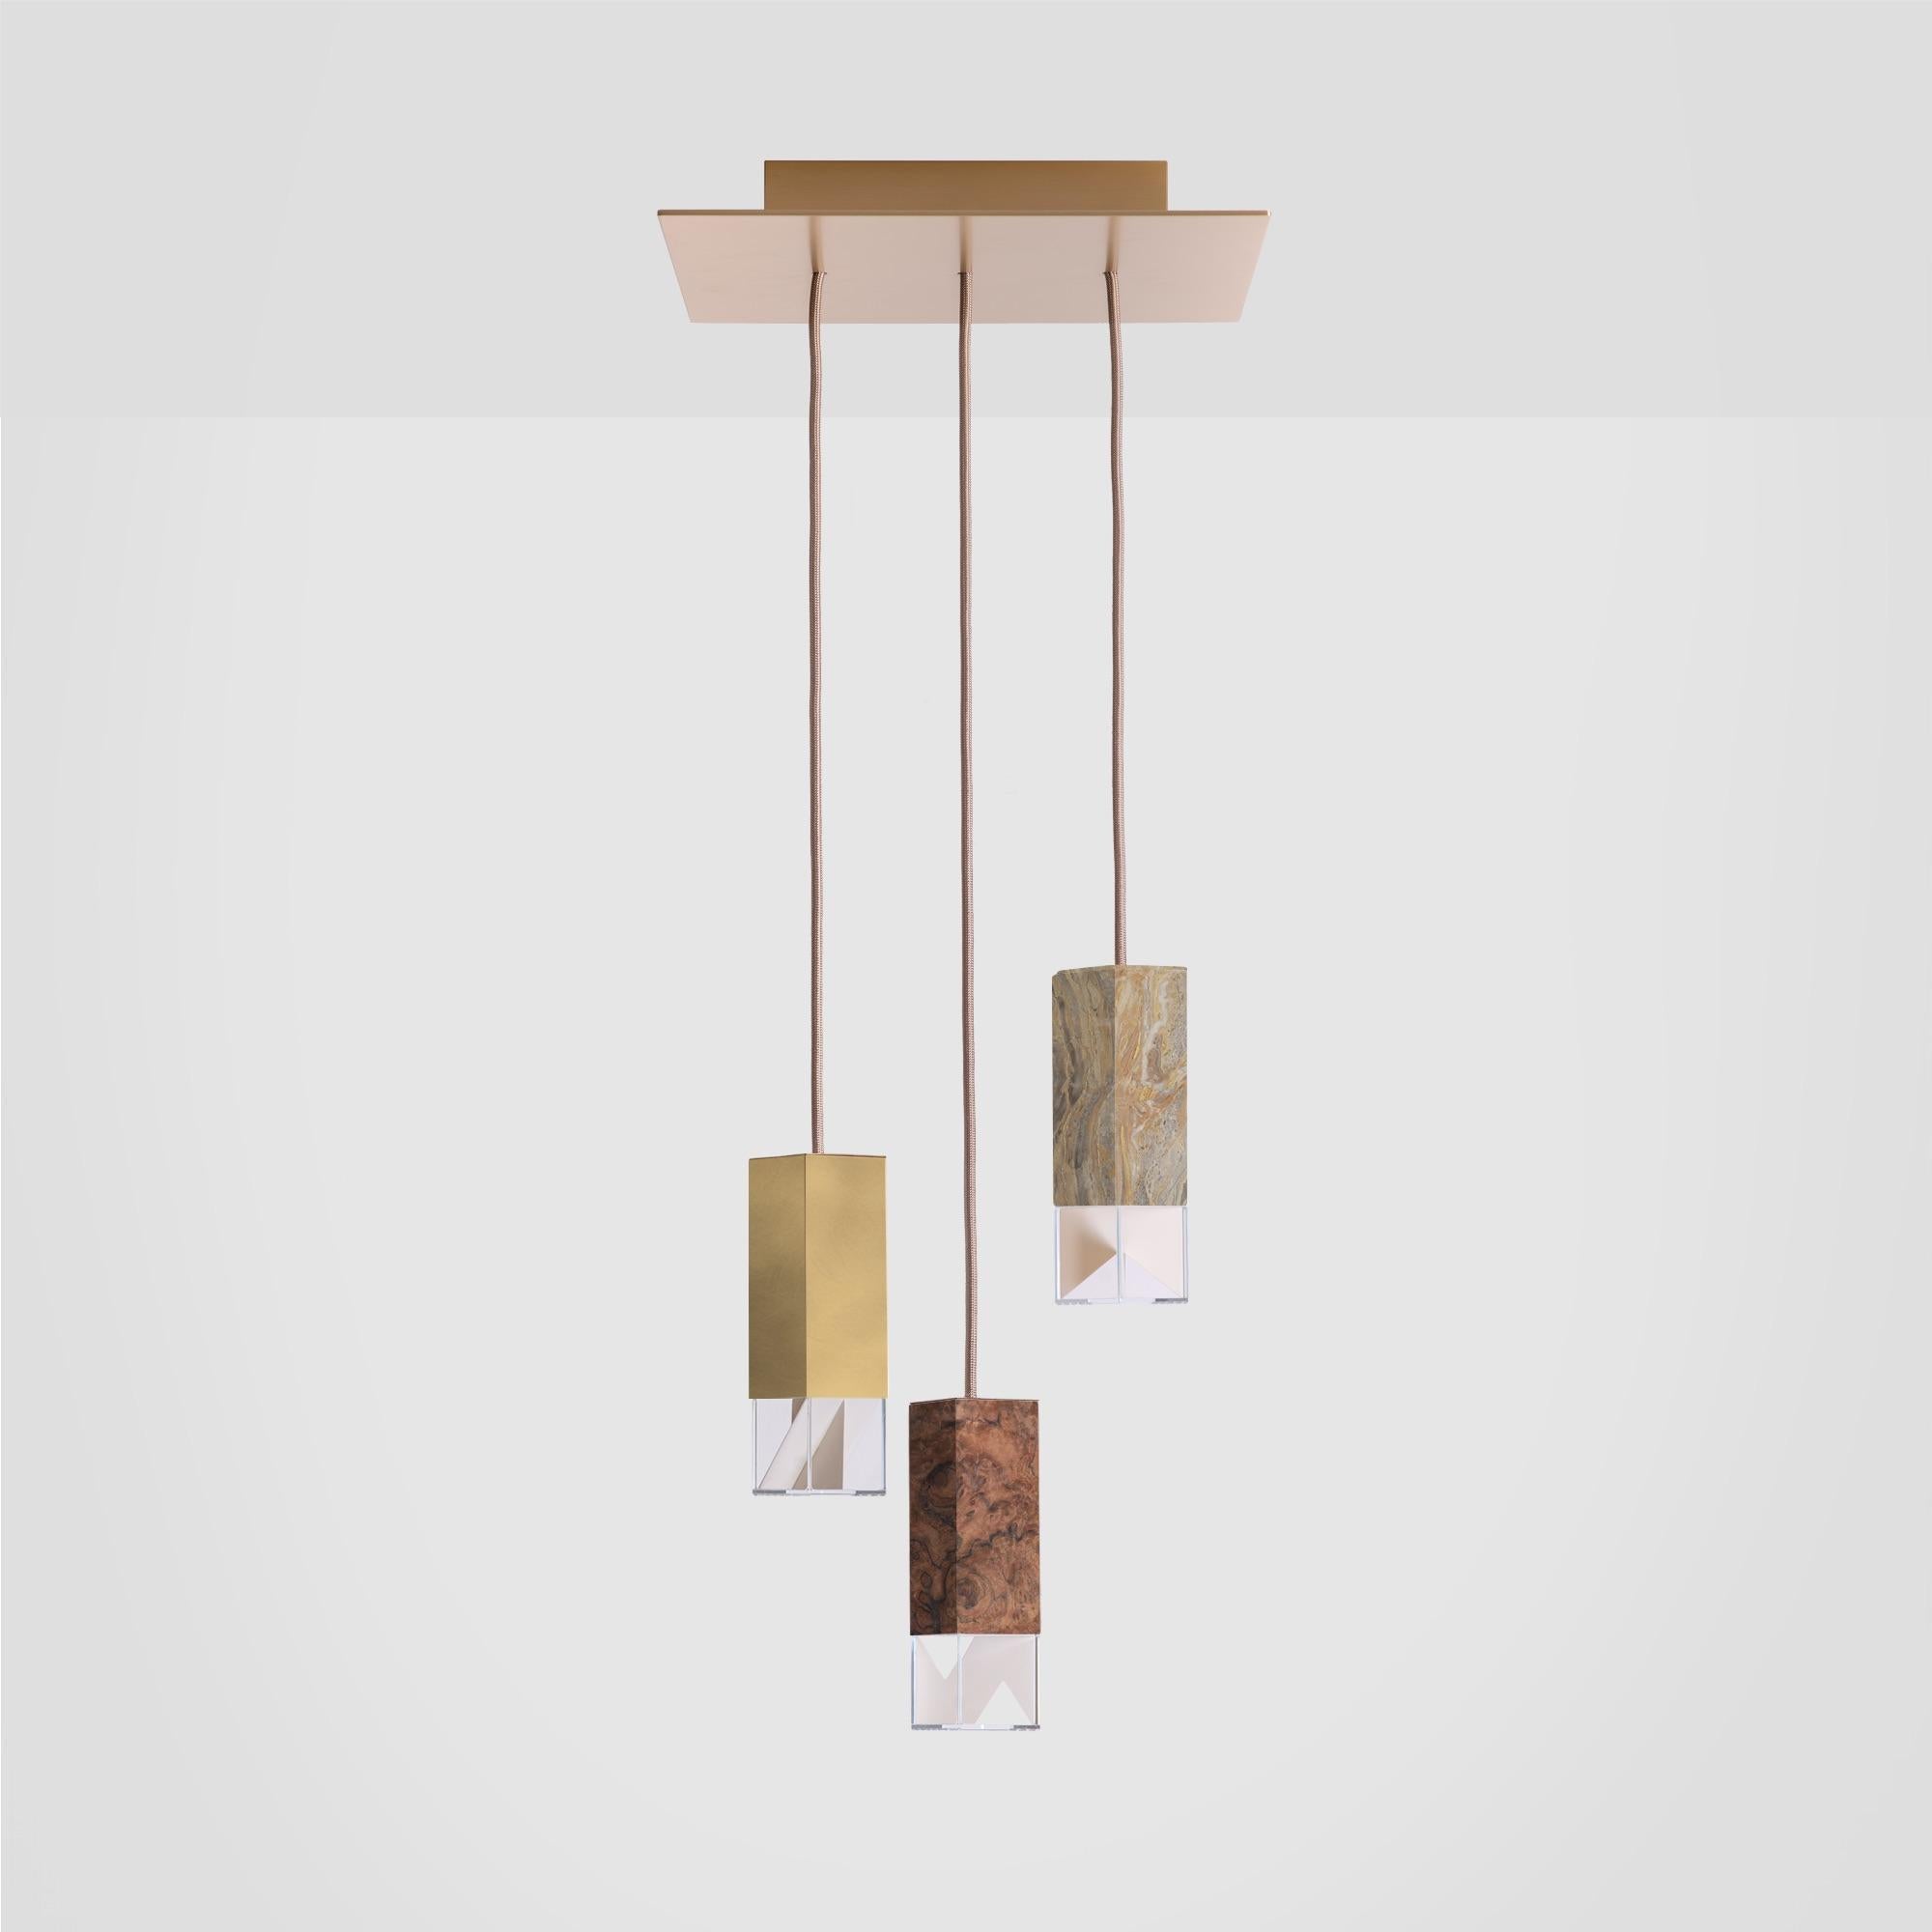 About
Modern 3 Light Chandelier Brass, Walnut and Arabescato Marble by Formaminima

Lamp/One Revamp Edition Chandelier 02
Design by Formaminima
Chandelier
Materials:
Body lamp handcrafted in burnished brushed brass, solid Arabescato Orobico marble,